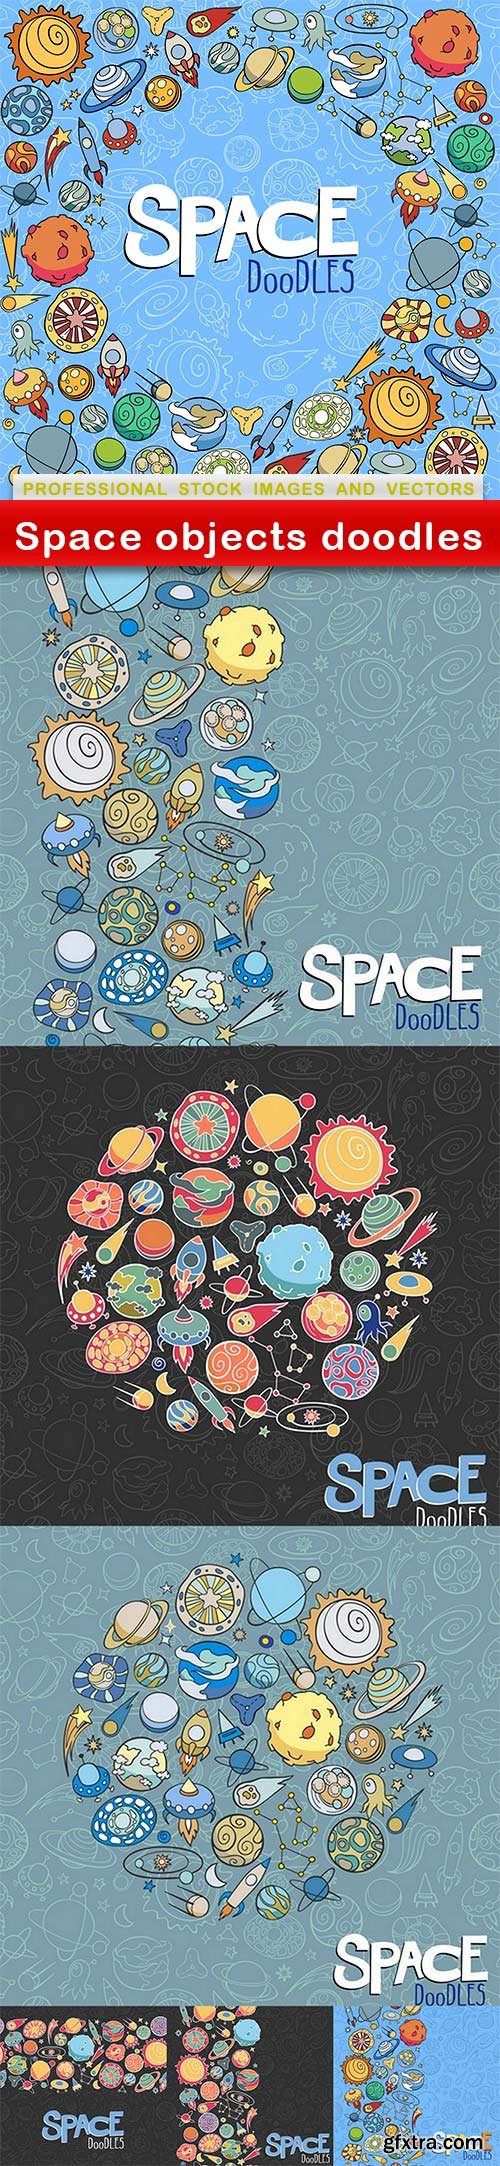 Space objects doodles - 7 EPS